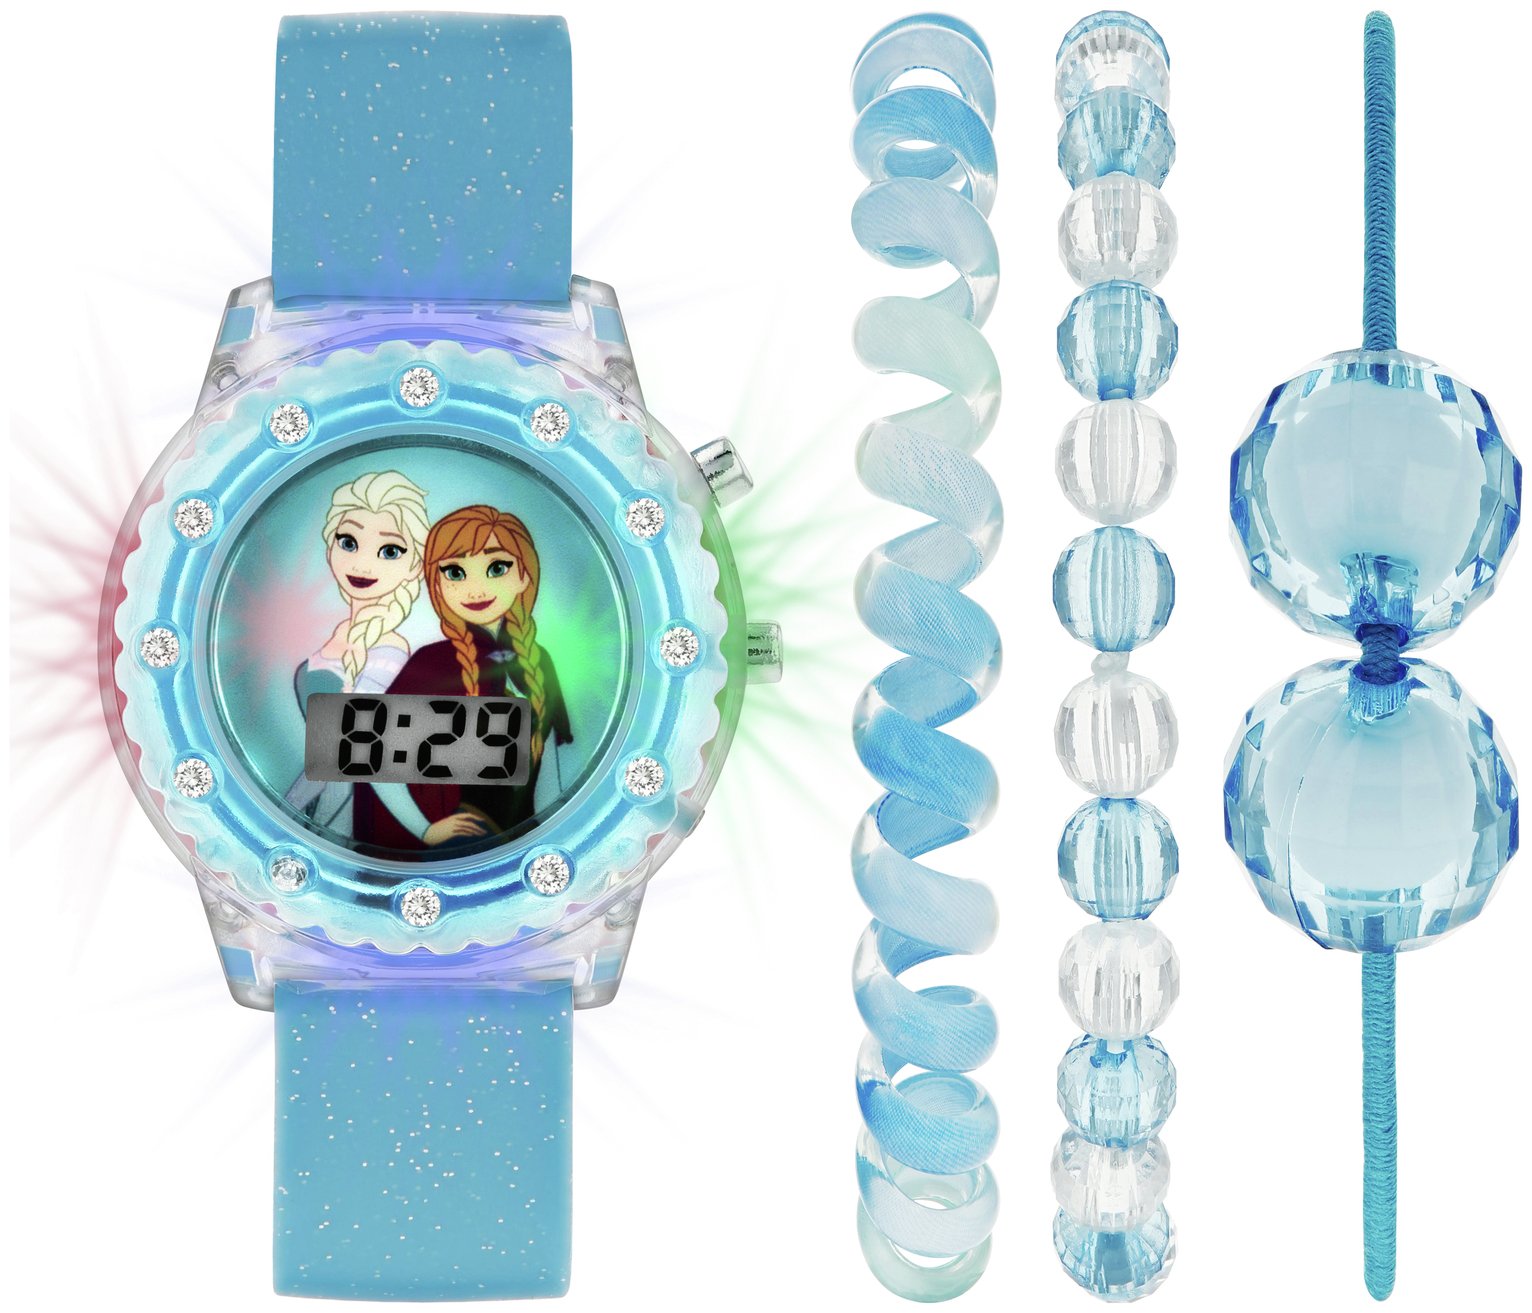 Disney Frozen Stone Set Light Up Watch and Jewellery Set review